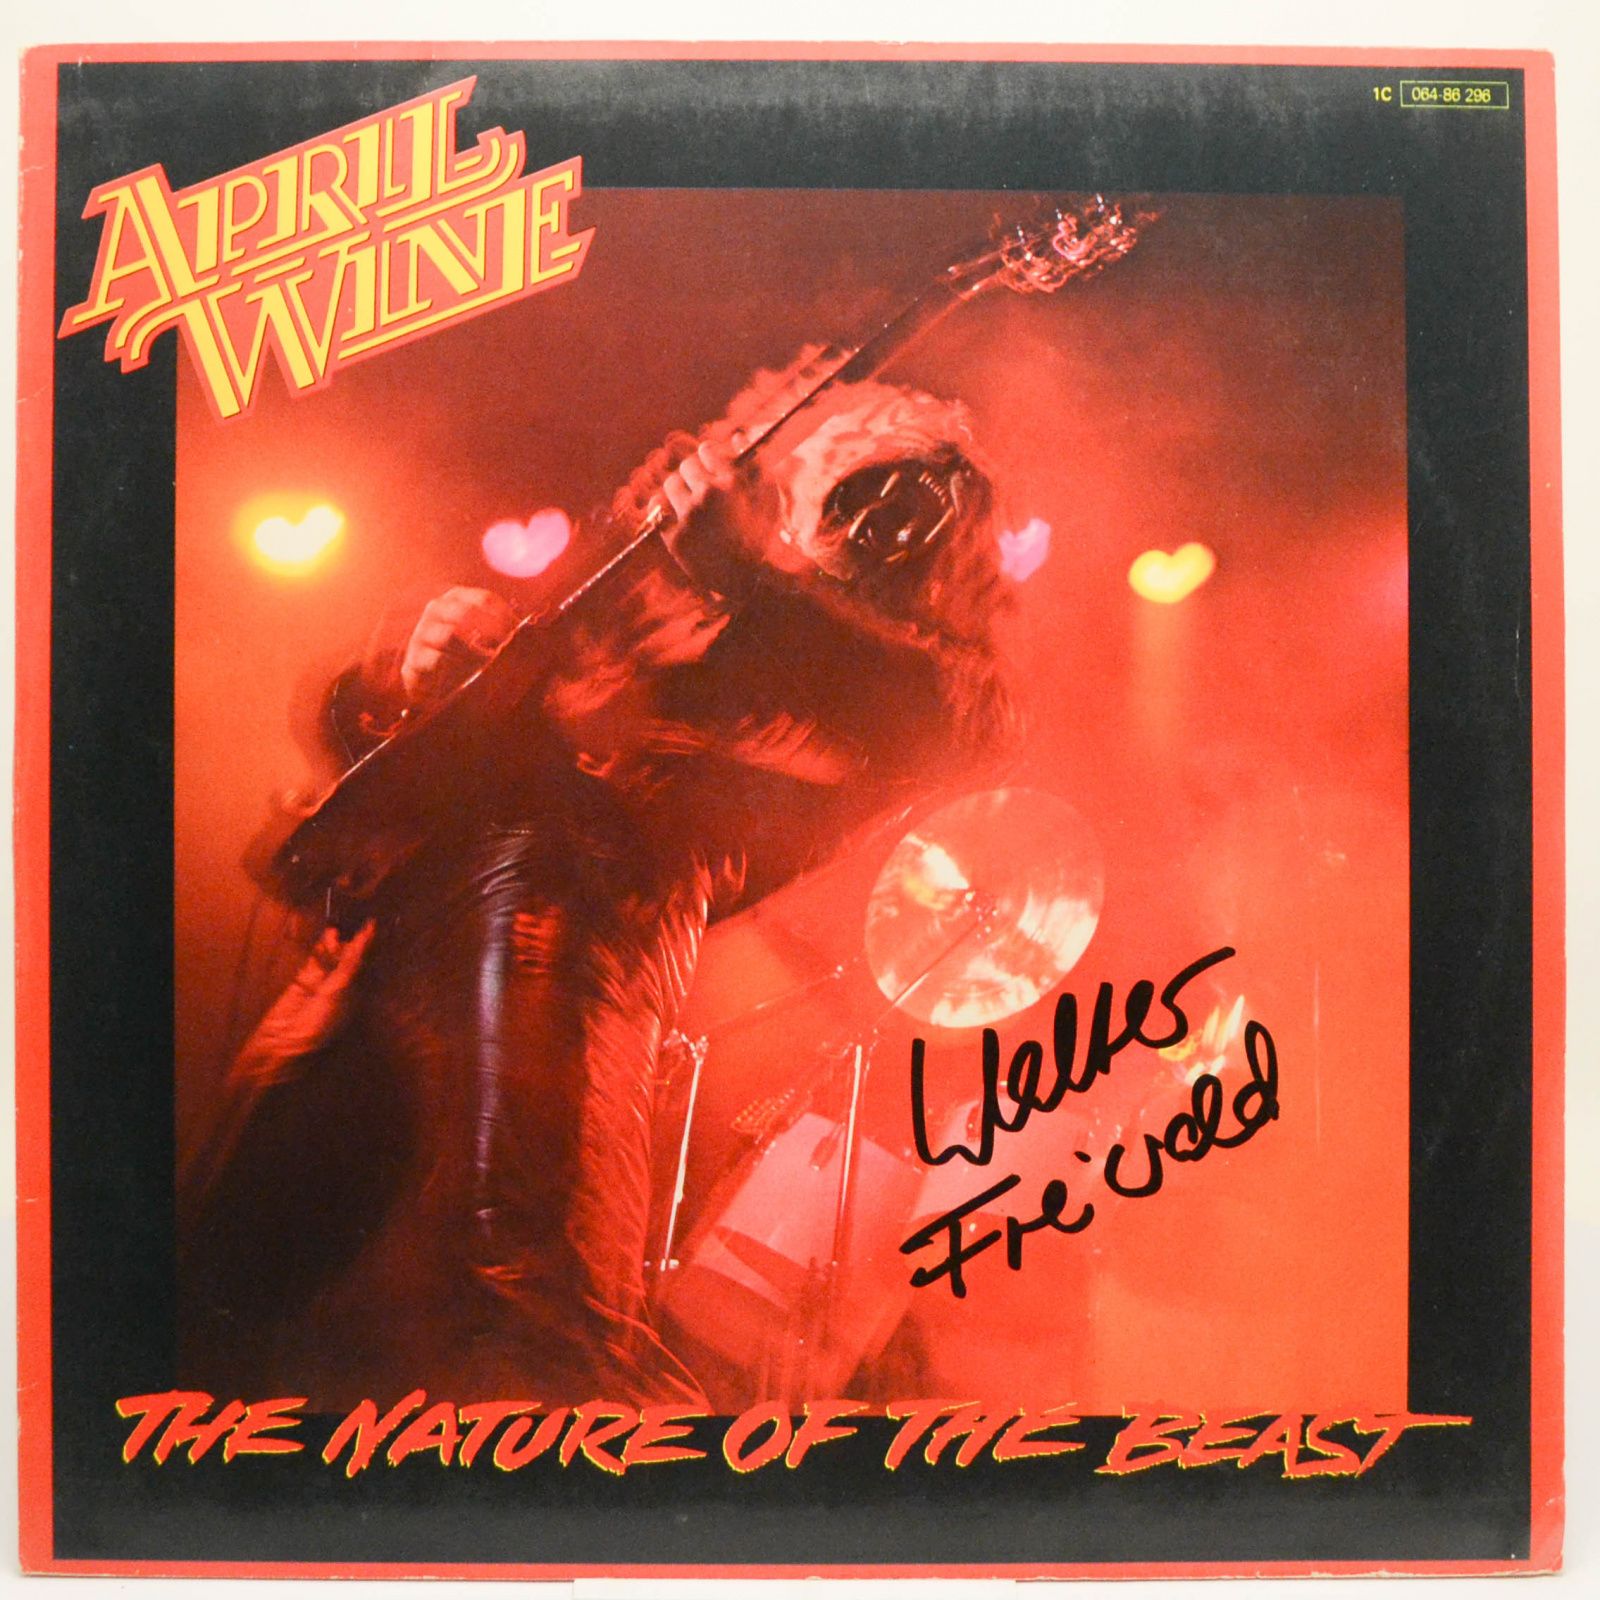 April Wine — The Nature Of The Beast, 1981